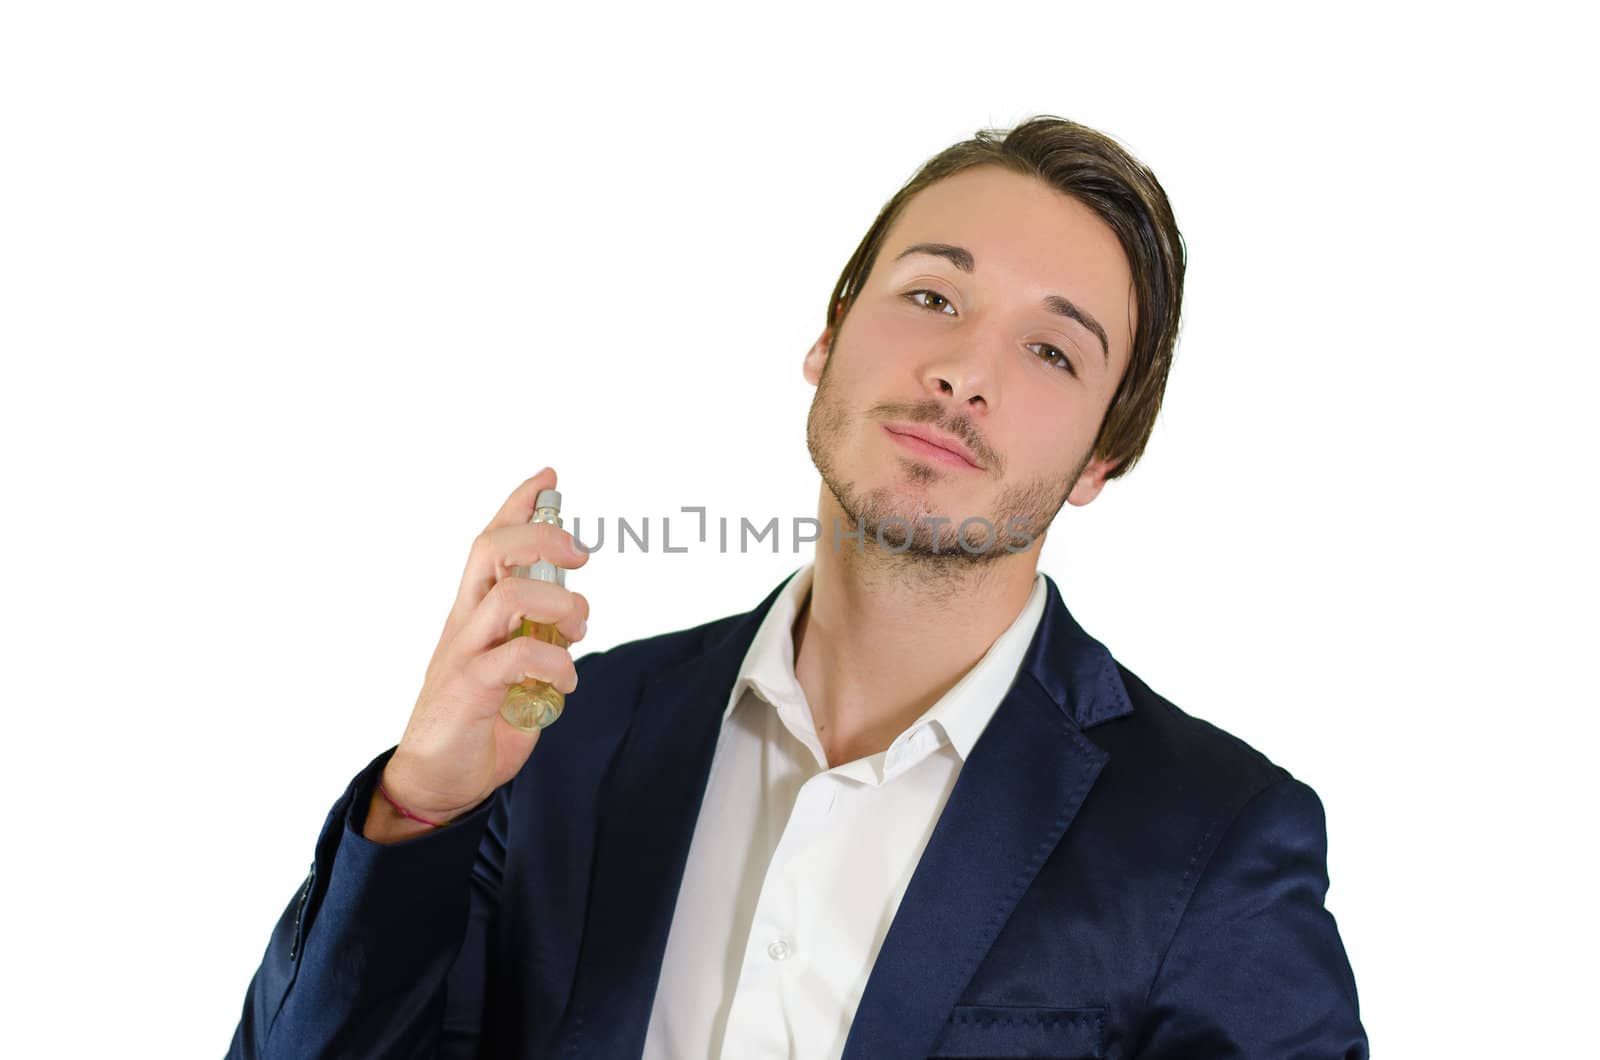 Attractive young man spraying perfume, using fragrance by artofphoto